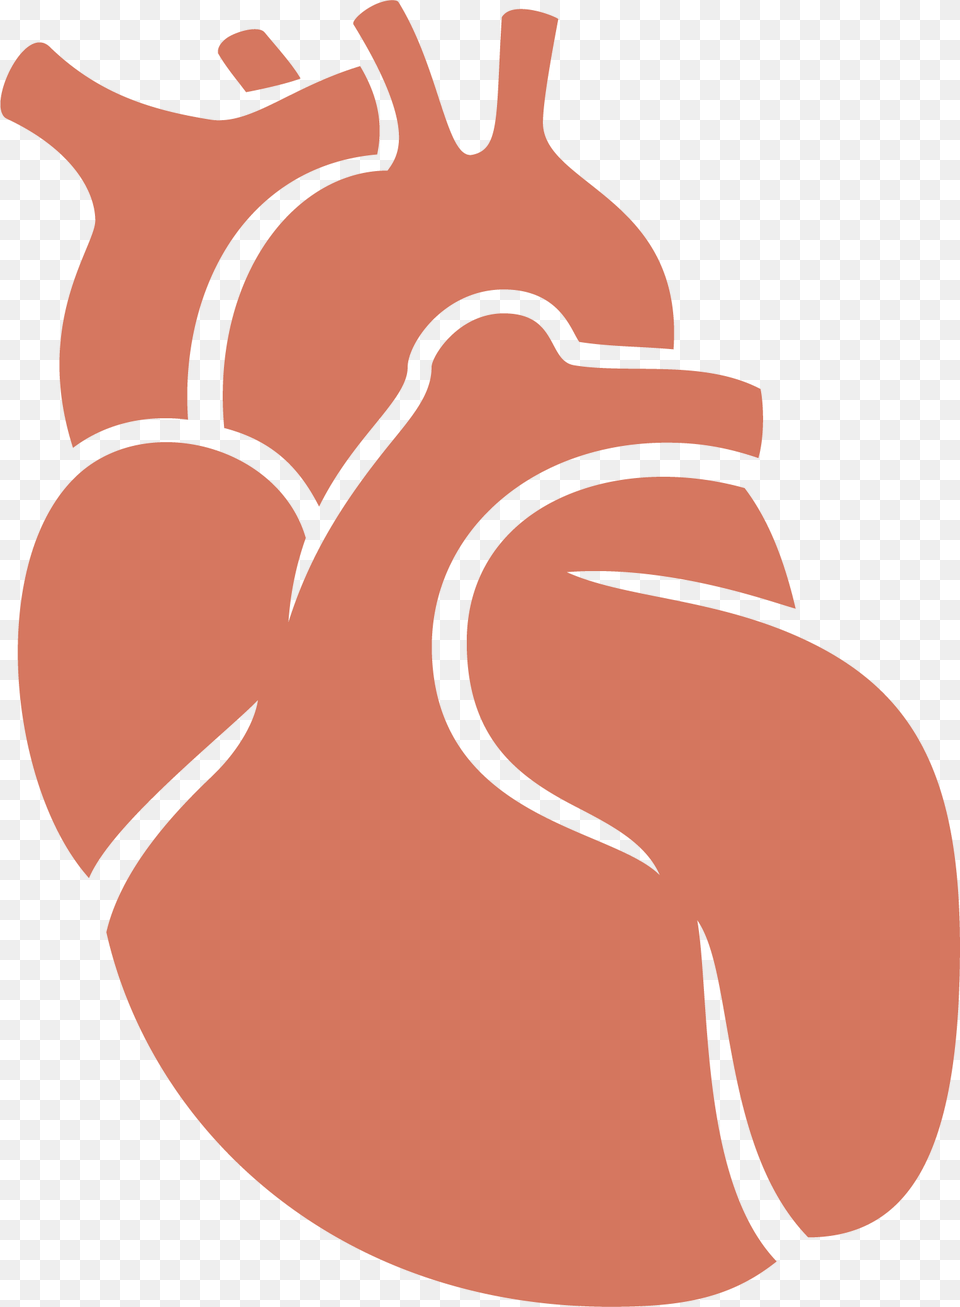 Donation Clipart Hand Heart Organ Donation Clip Art, Dynamite, Weapon Free Transparent Png